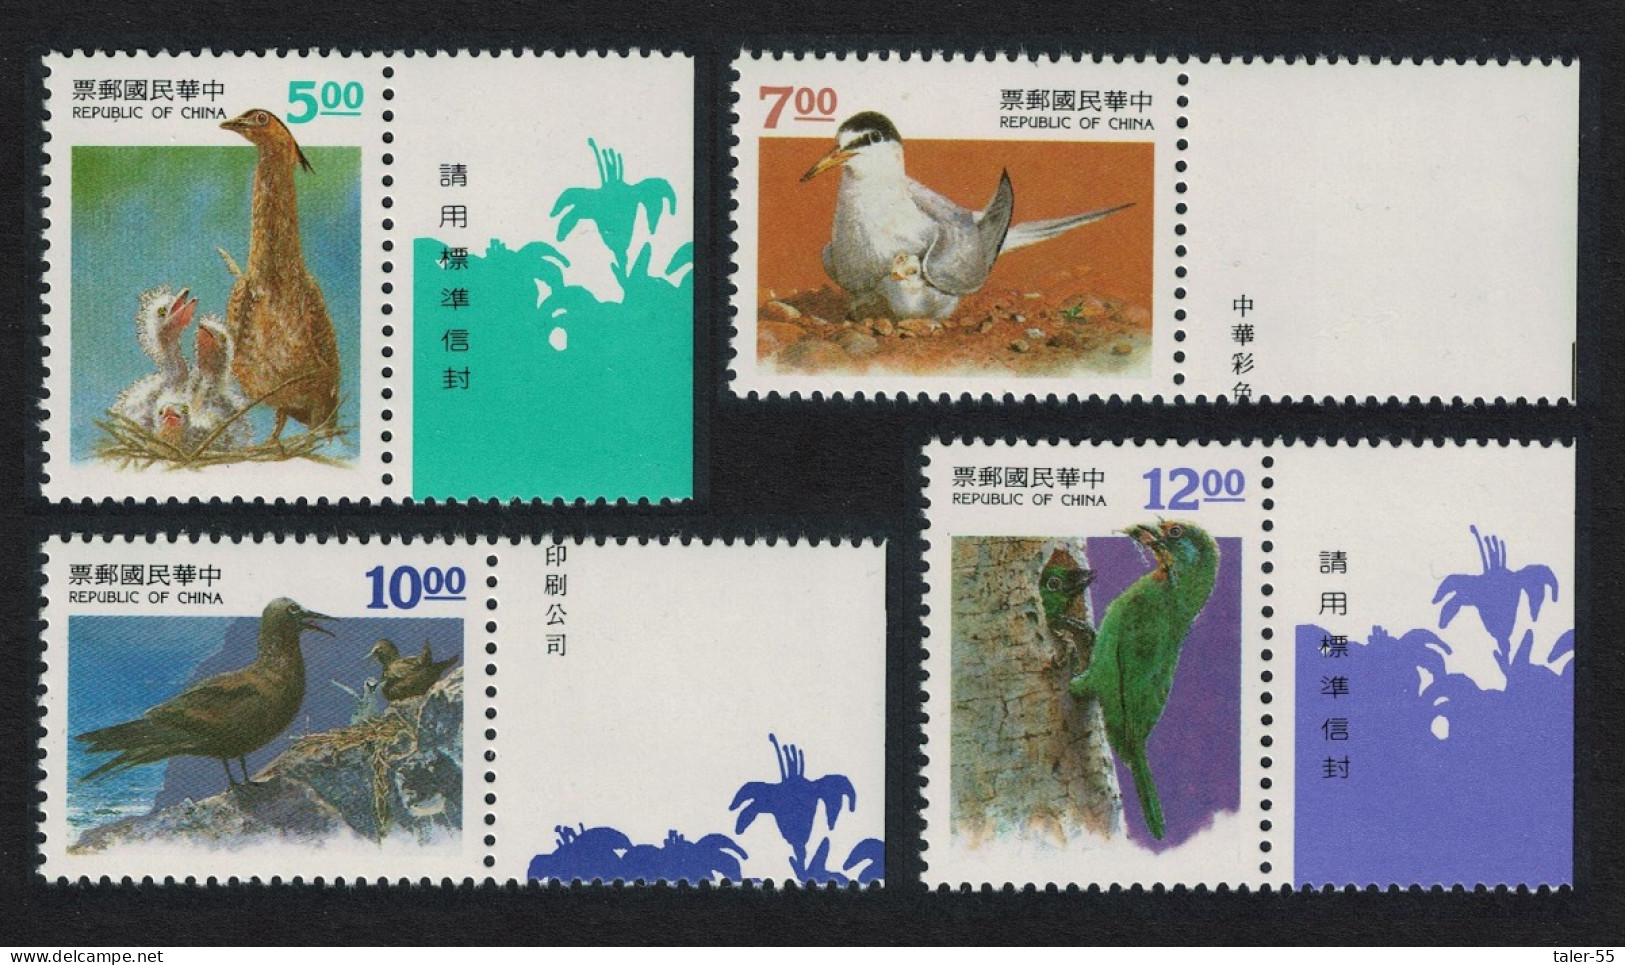 Taiwan Heron Tern Noddy Barbet Birds With Their Young 4v Margins 1994 MNH SG#2193-2196 - Unused Stamps